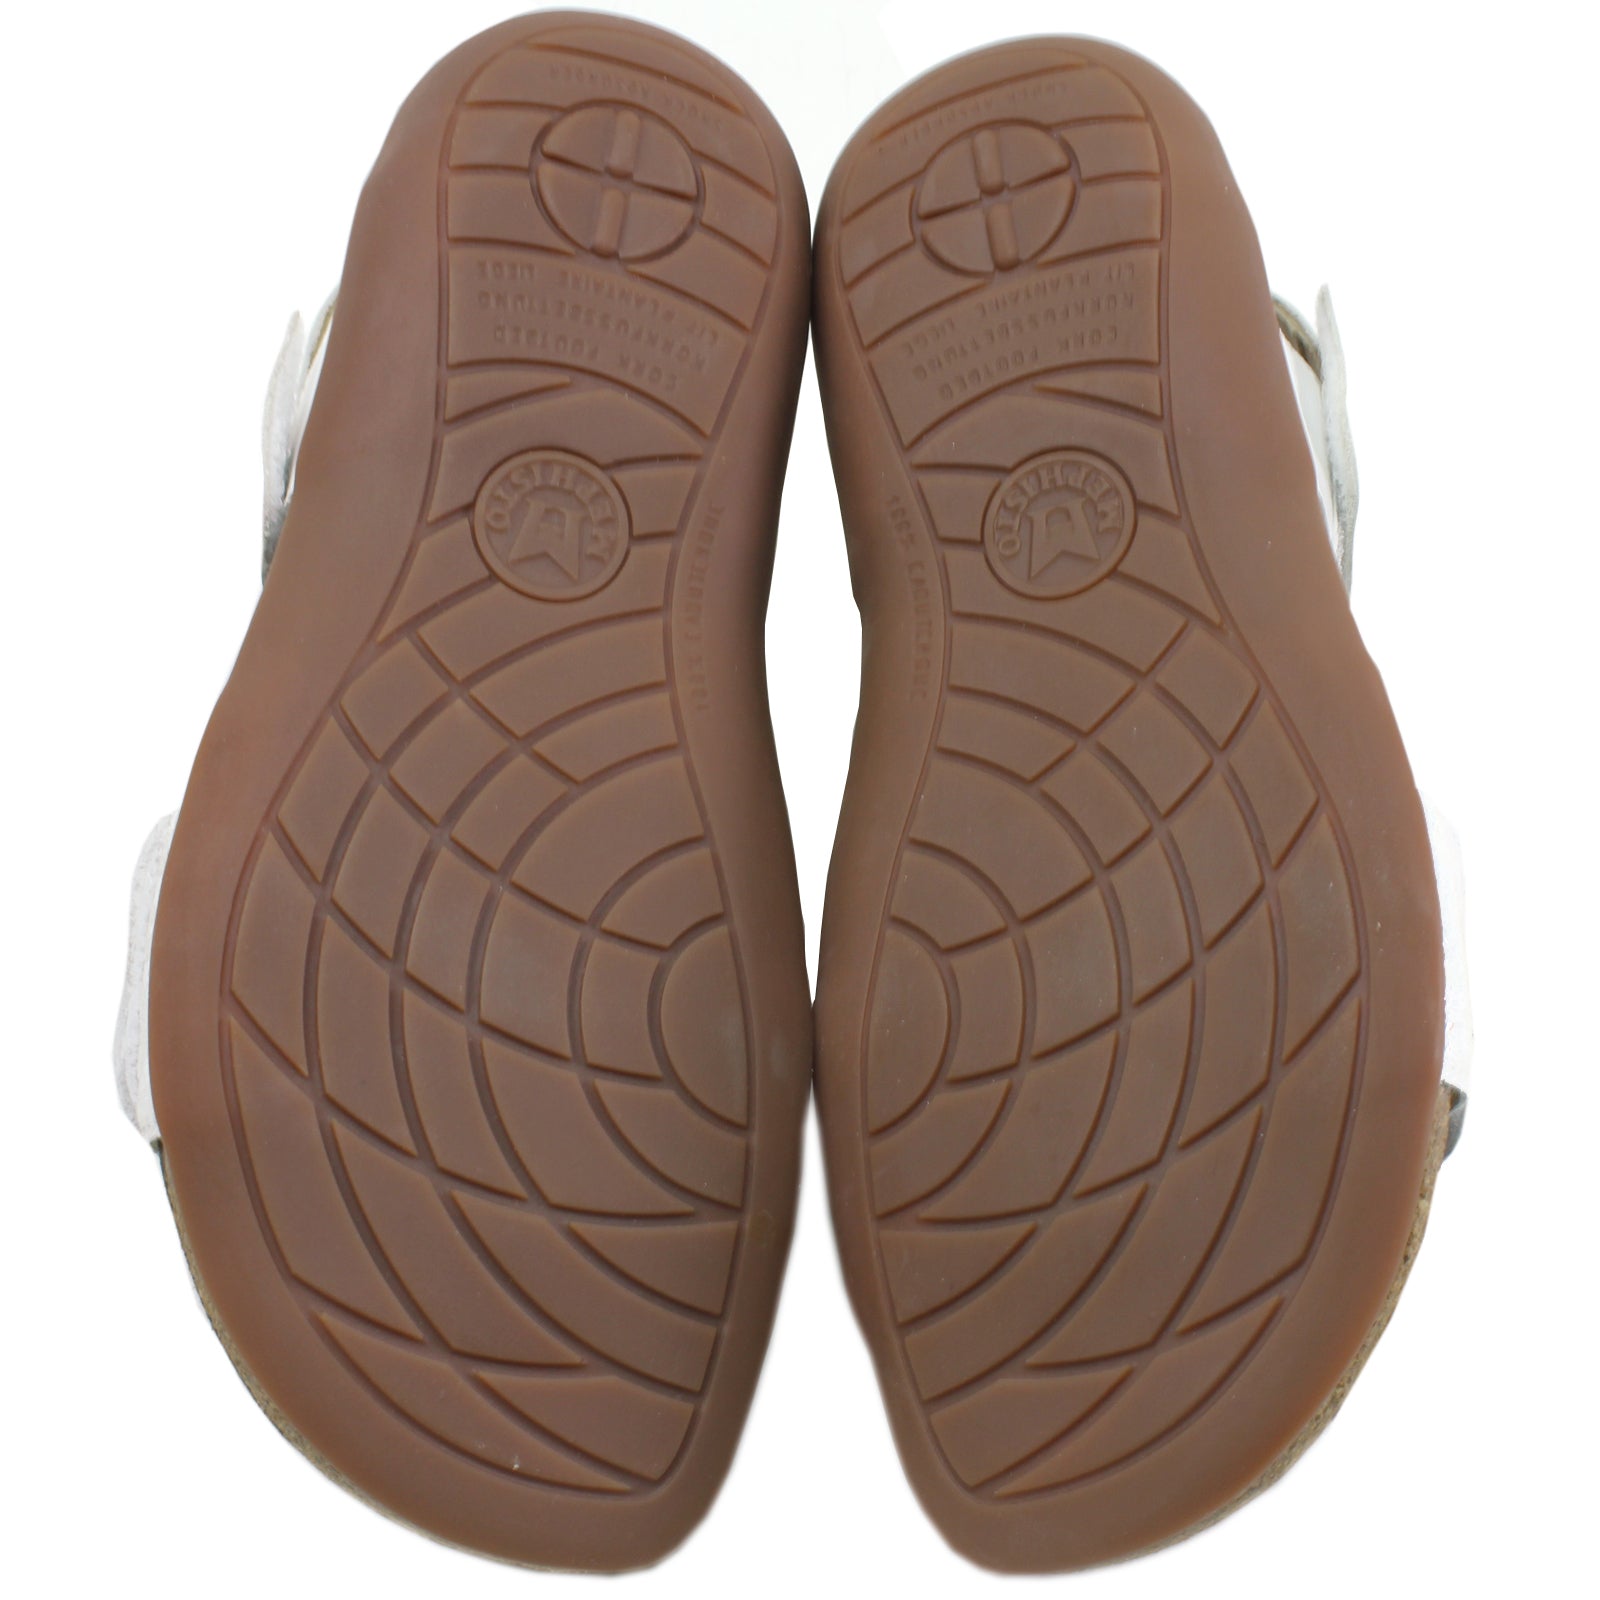 Mephisto Agave Leather Womens Sandals - UK 6.5